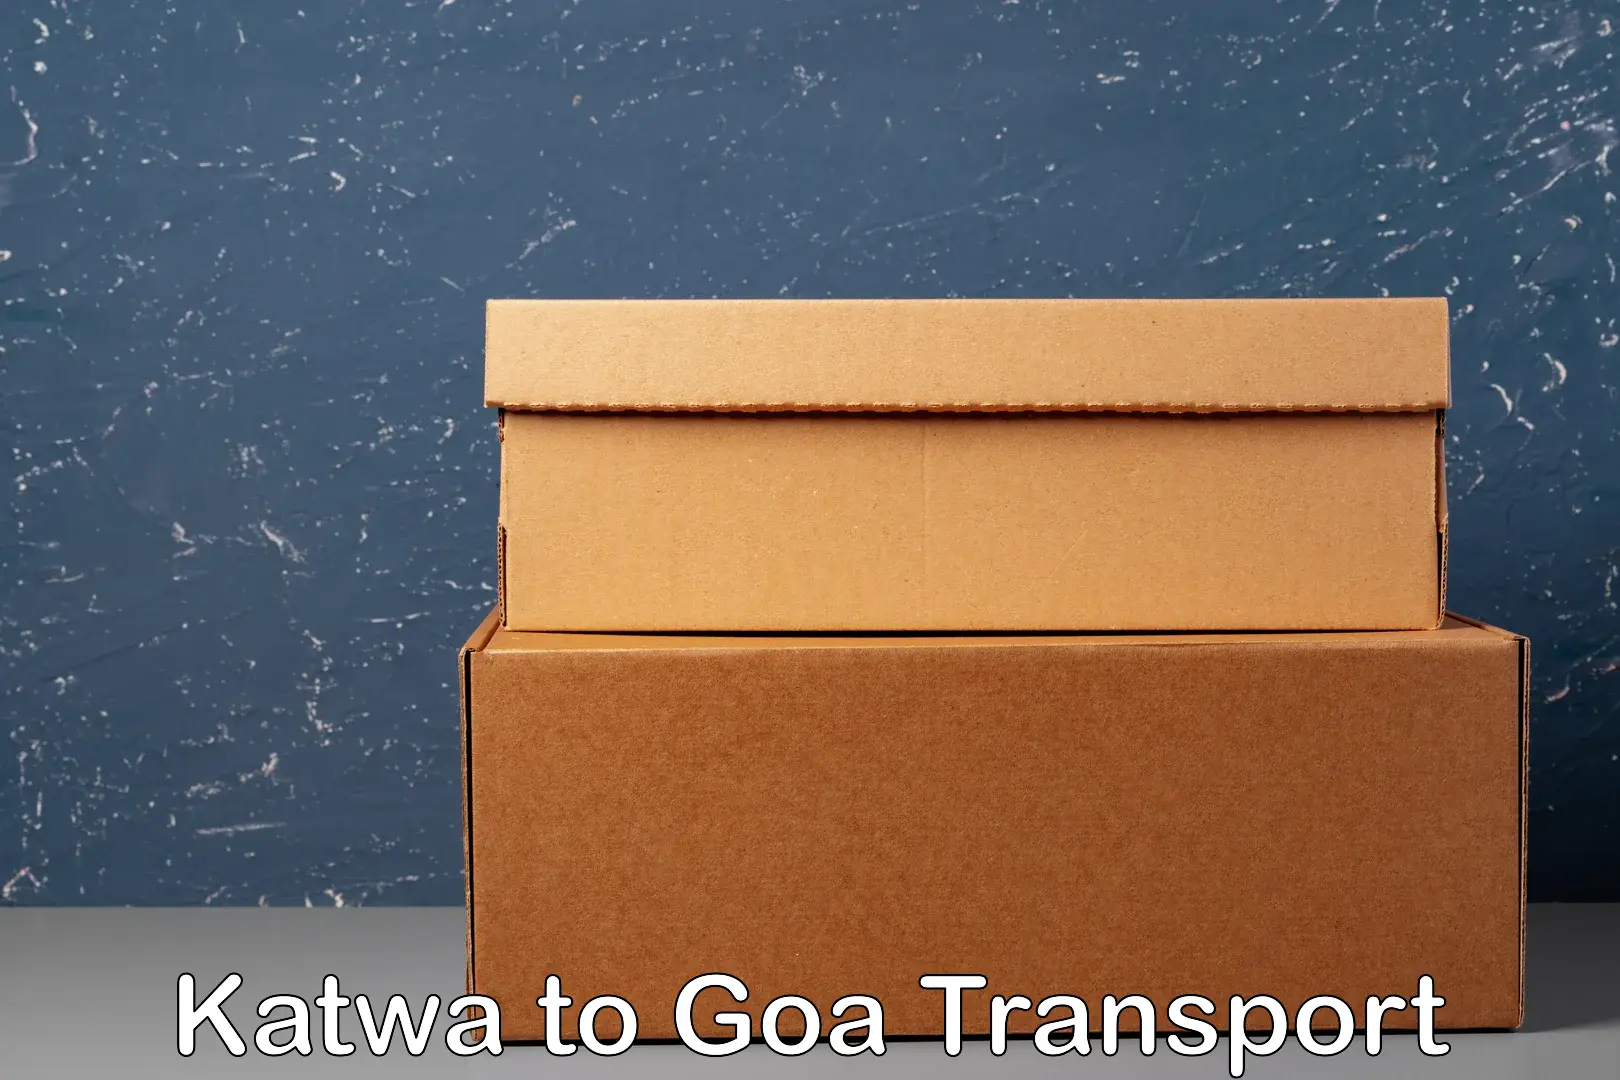 Transport bike from one state to another Katwa to Goa University